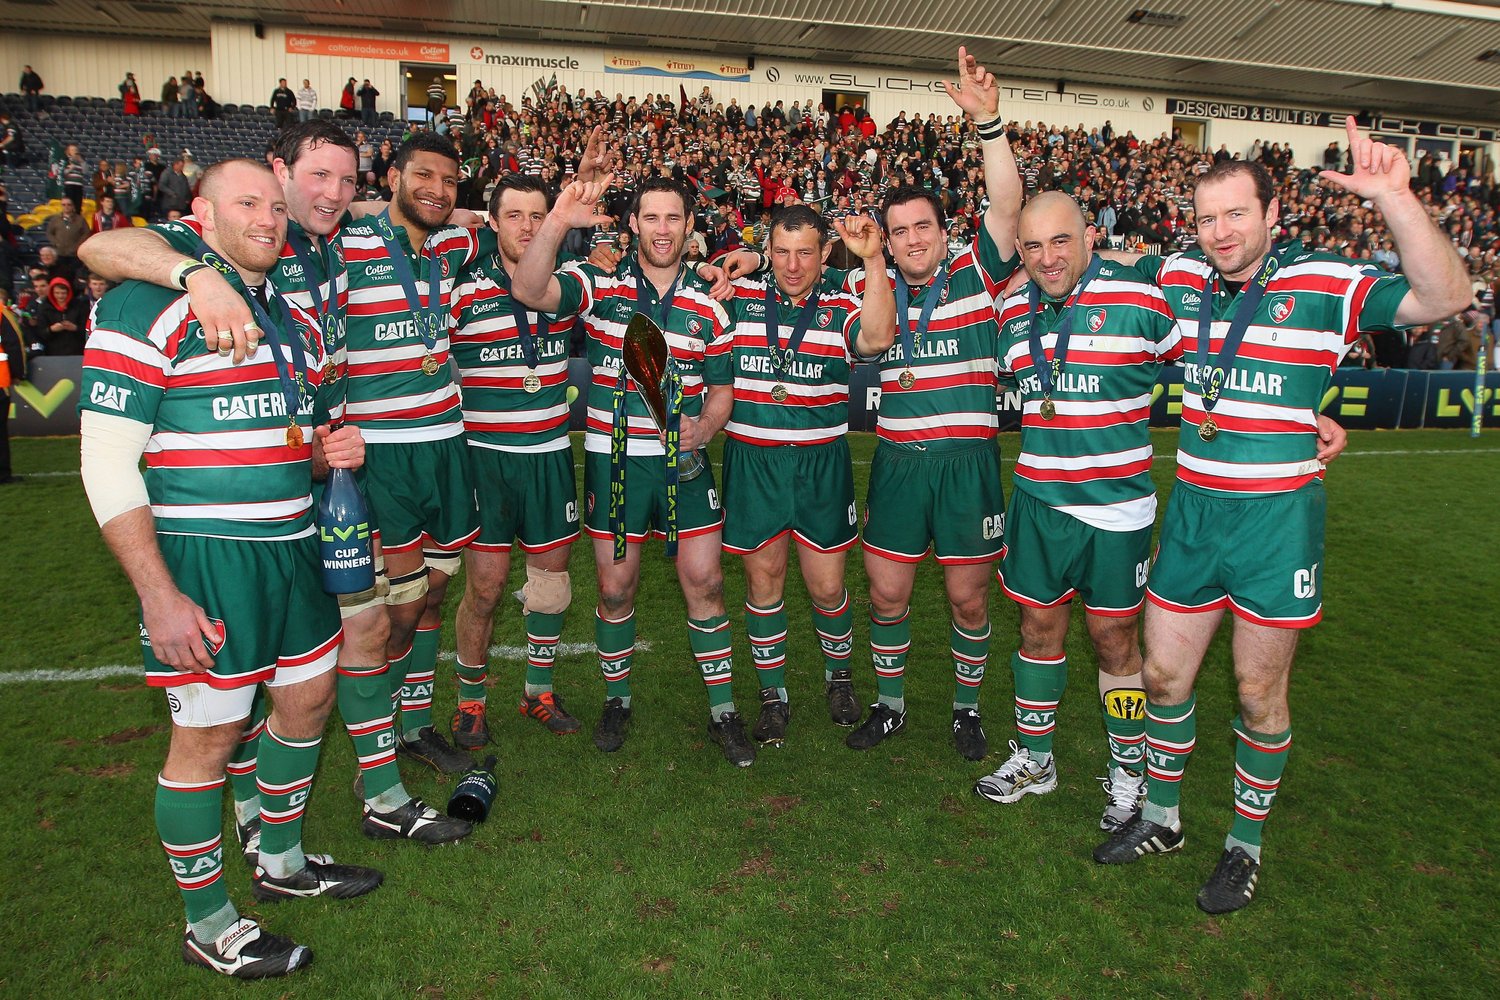 Tigers triumph in the 06/07 and 11/12 Anglo-Welsh Cup finals